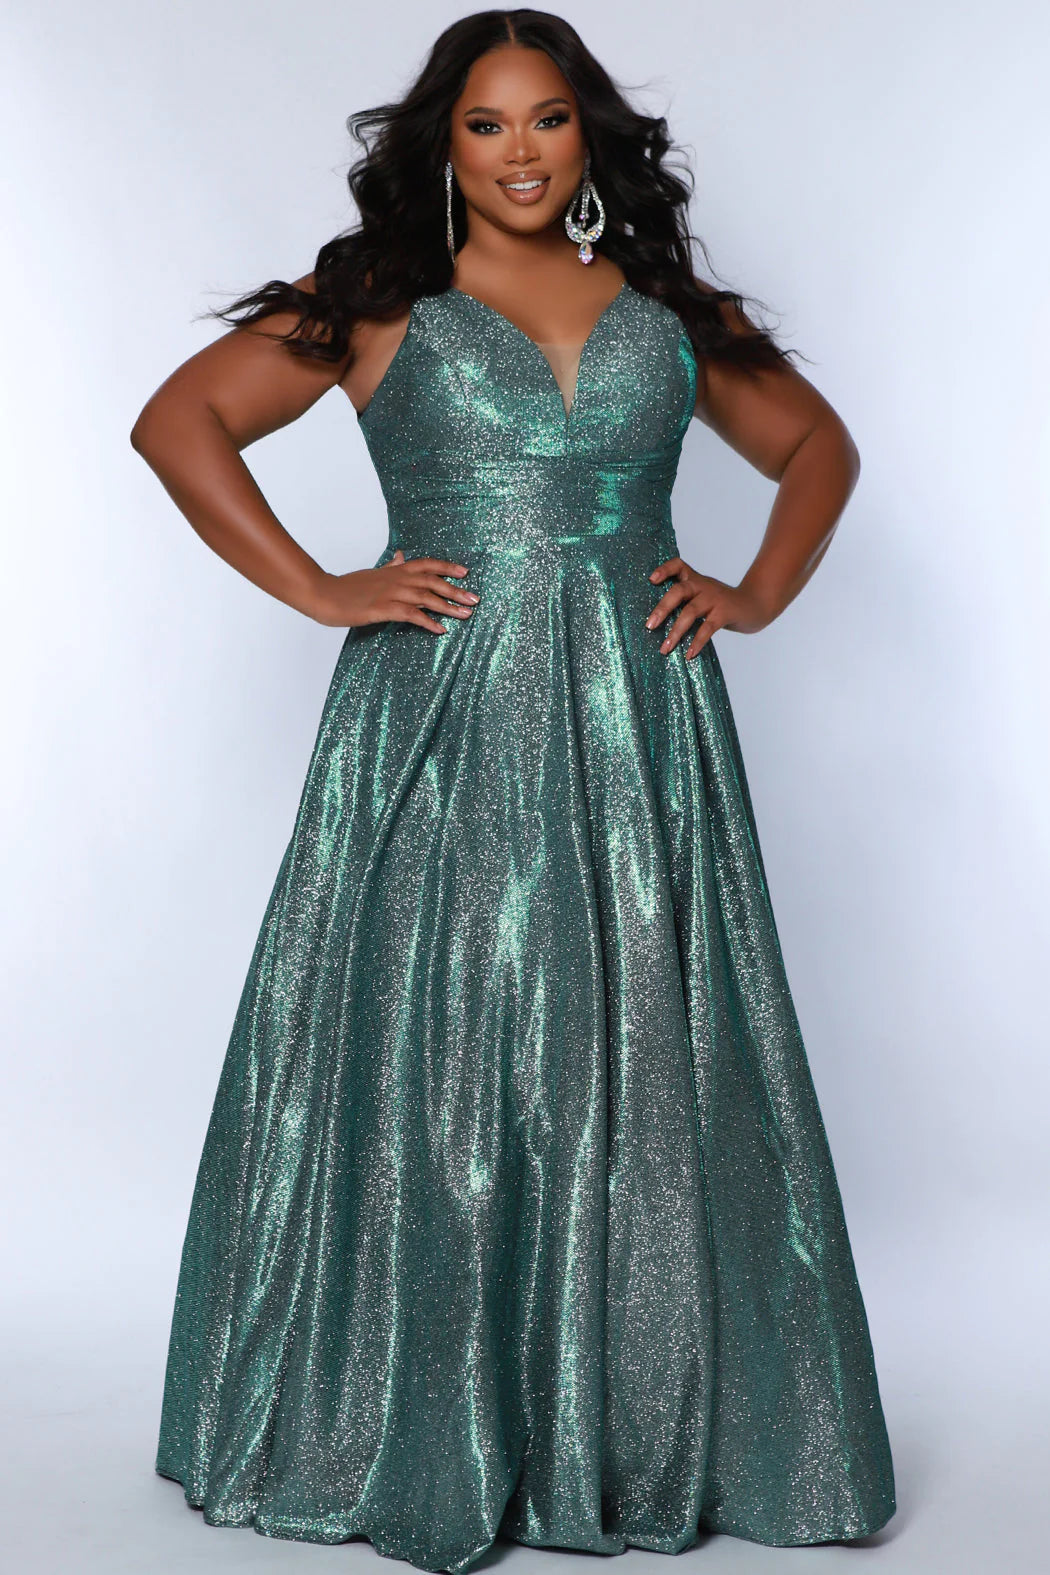 The Sydneys Closet SC7378 Long Prom Dress is perfect for plus size women who want to make a statement. With its V-neckline, A-line silhouette, and two side pockets, this formal gown is sure to turn heads. Crafted from high-quality materials for a comfortable fit, this dress is ideal for special events like proms and pageants. Look no further than our Secret Treasure plus size evening gown to look glamorous at Prom 2024 or the next formal occasion coming up on your calendar.  